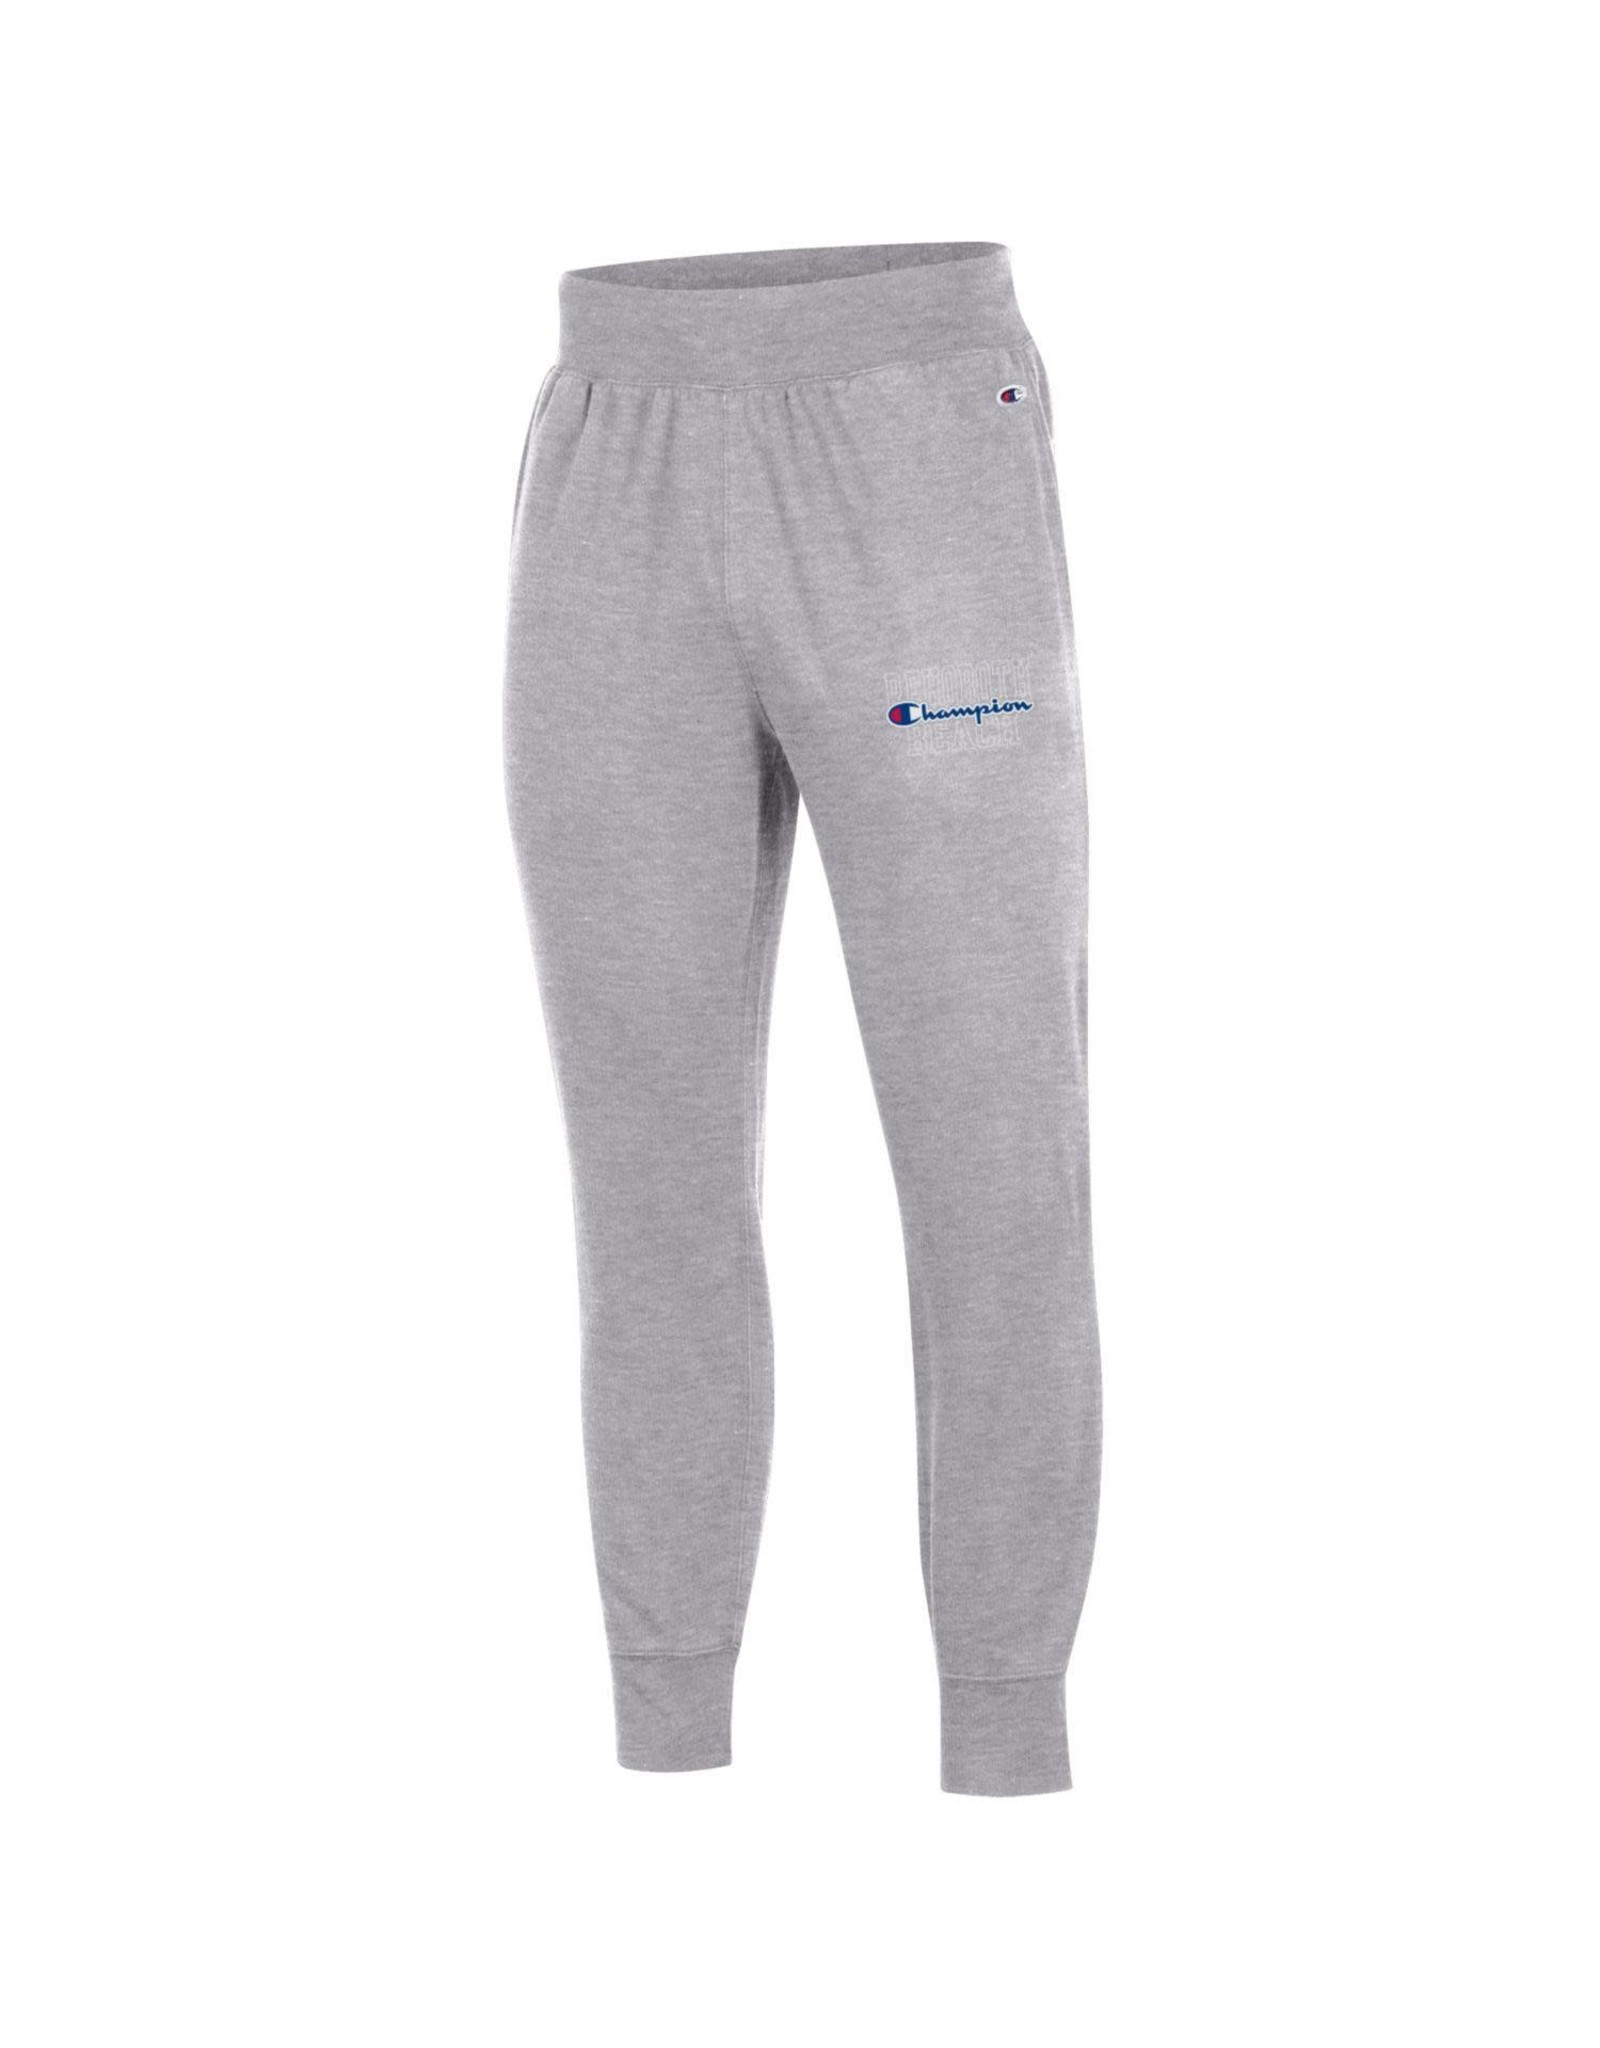 CHAMPION MENS ROCHESTER JOGGERS - Rehoboth Lifestyle